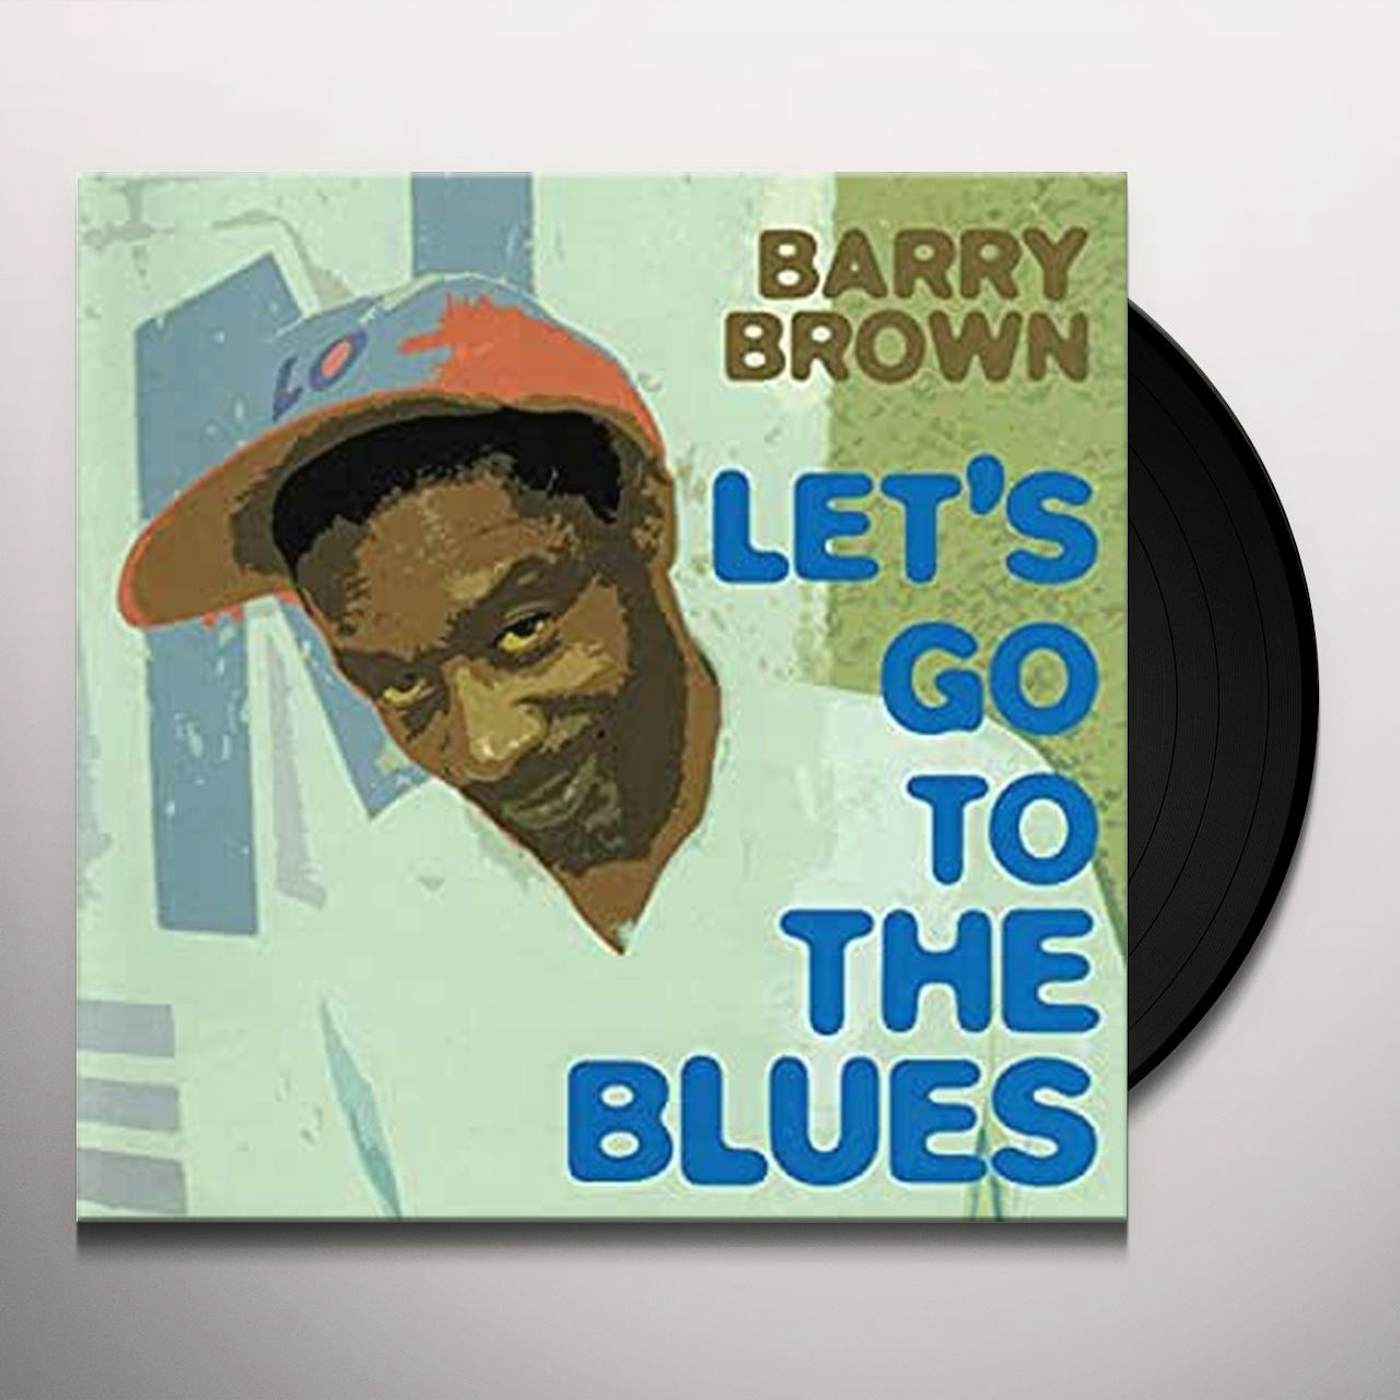 Barry Brown LETS GO TO THE BLUES (Vinyl)